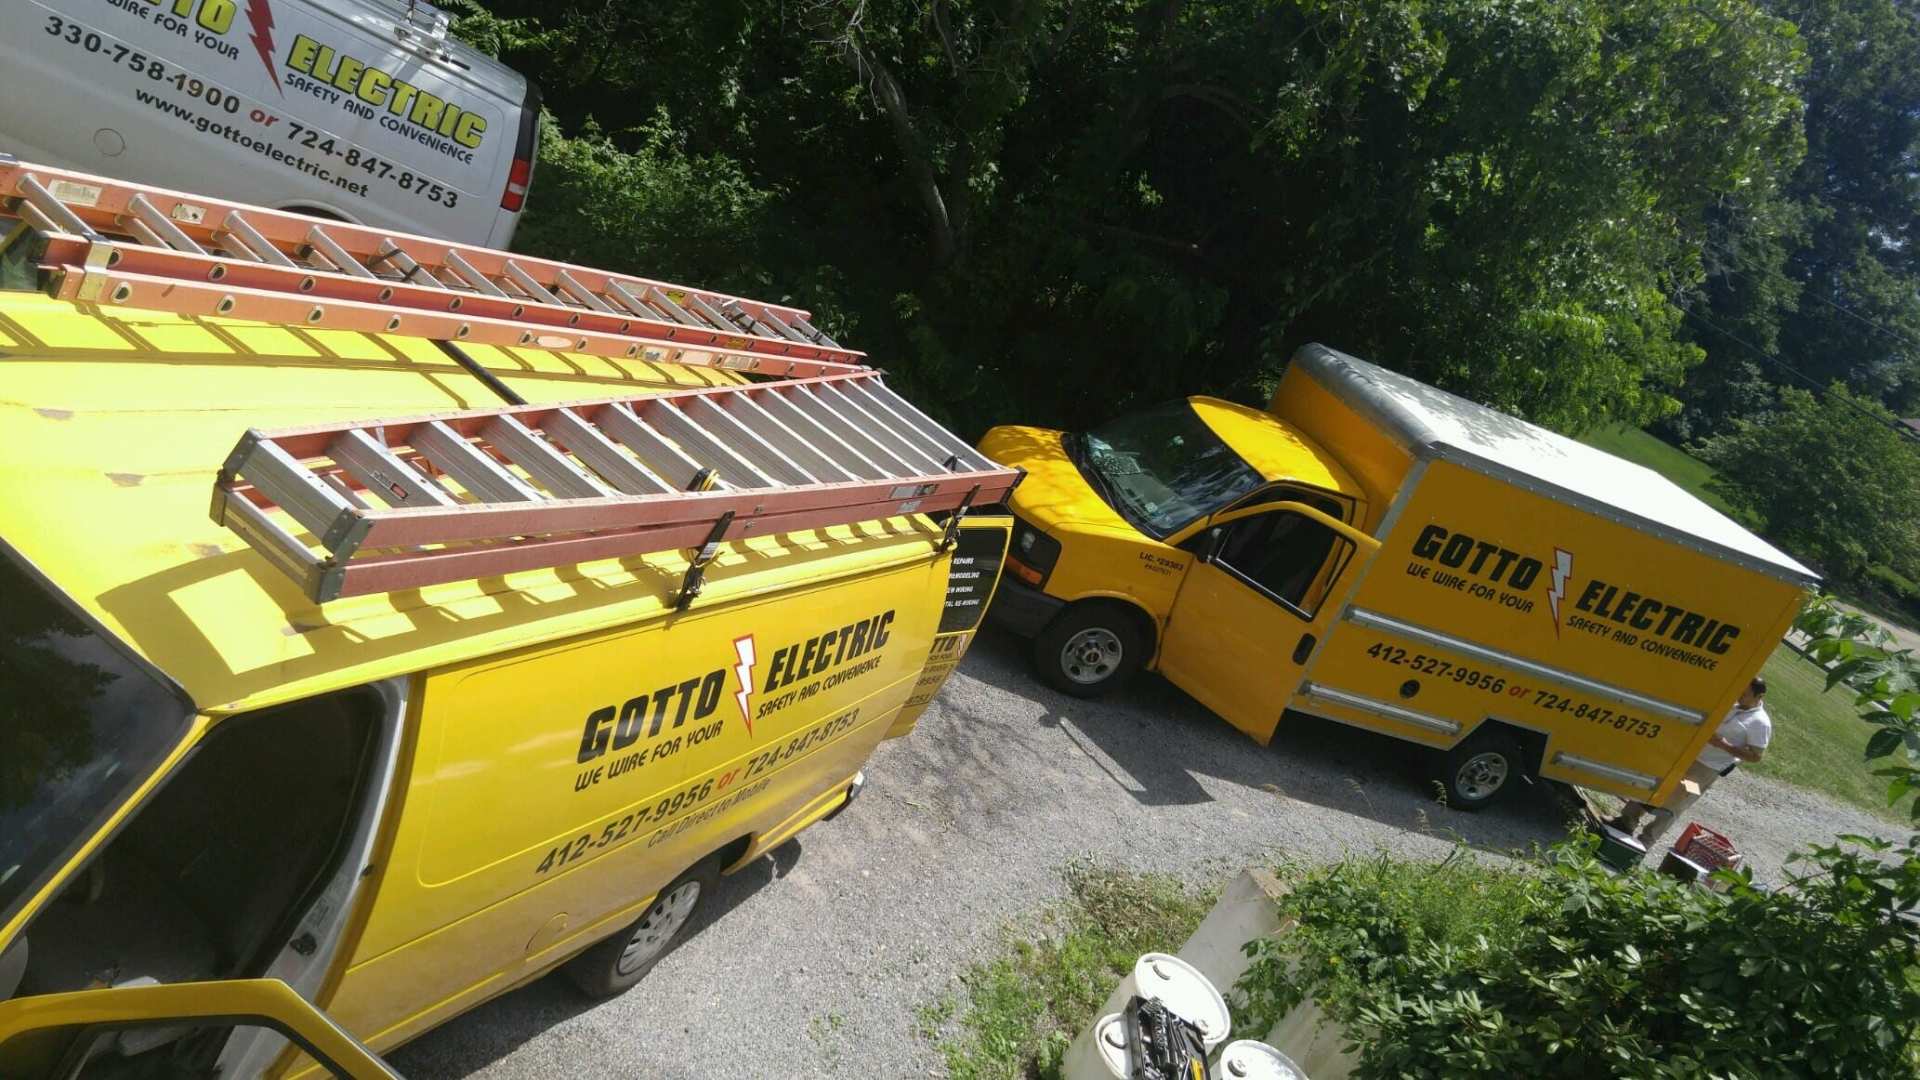 Gotto vans — New Construction in Beaver, PA